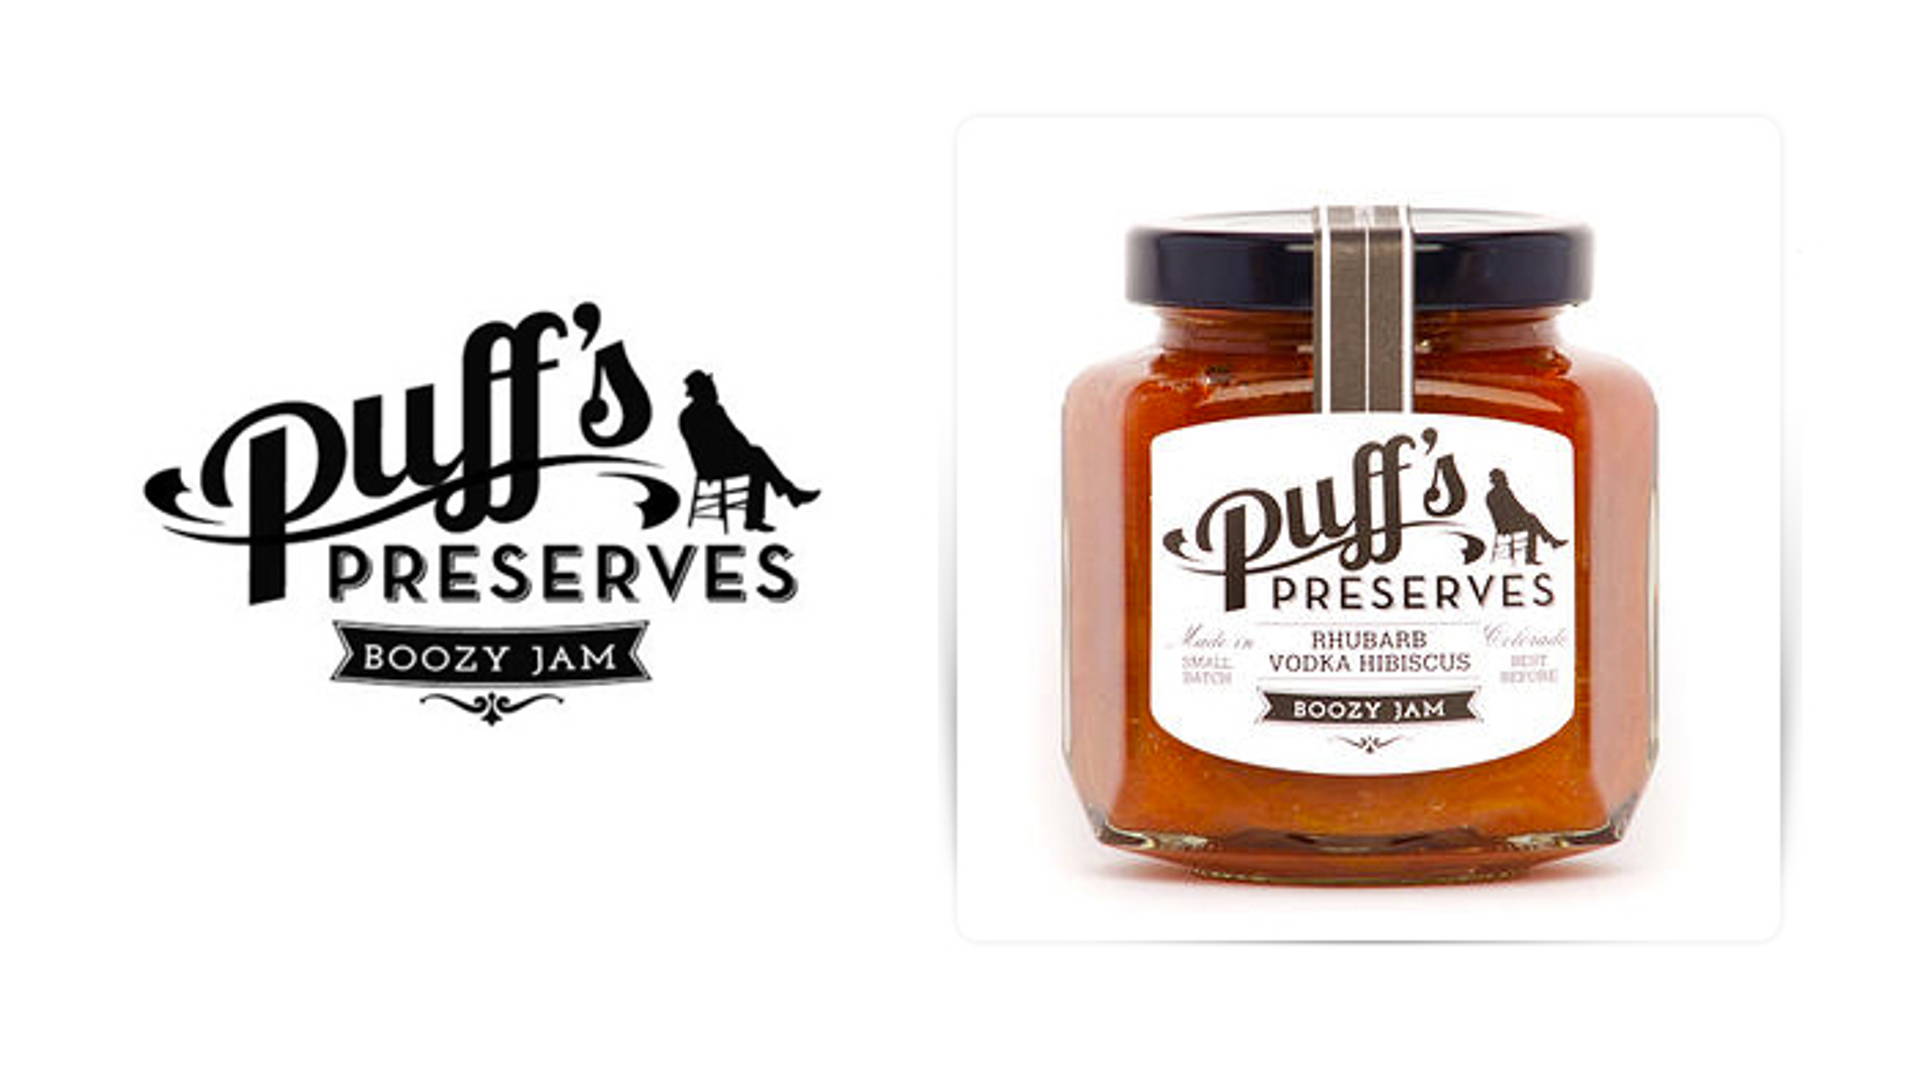 Featured image for Puff's Preserves Boozy Jam